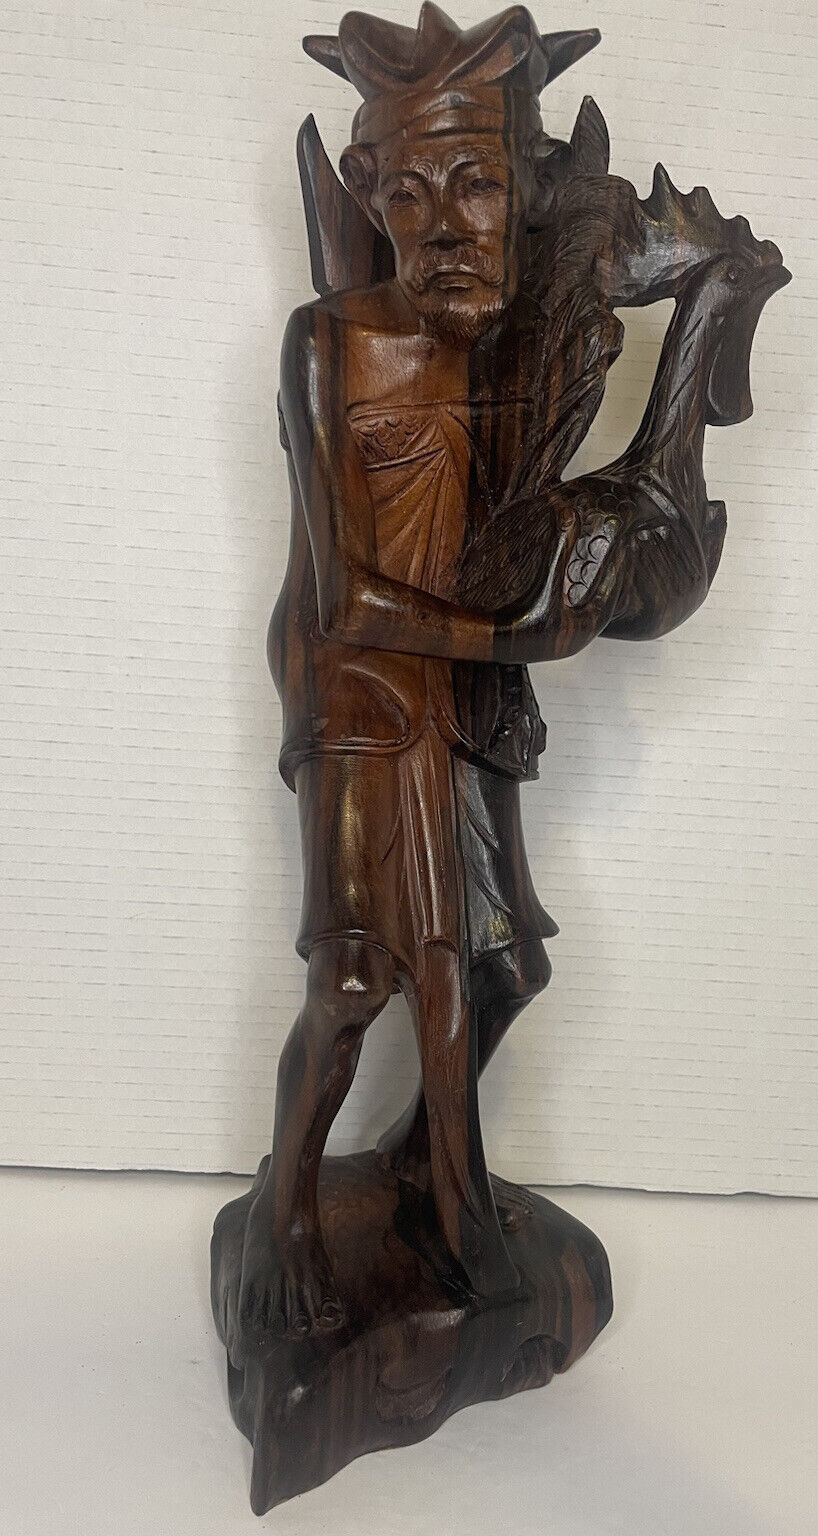 Wood Carving Statue Indonesian Man With Rooster 15” Tall Weighs 3.77 